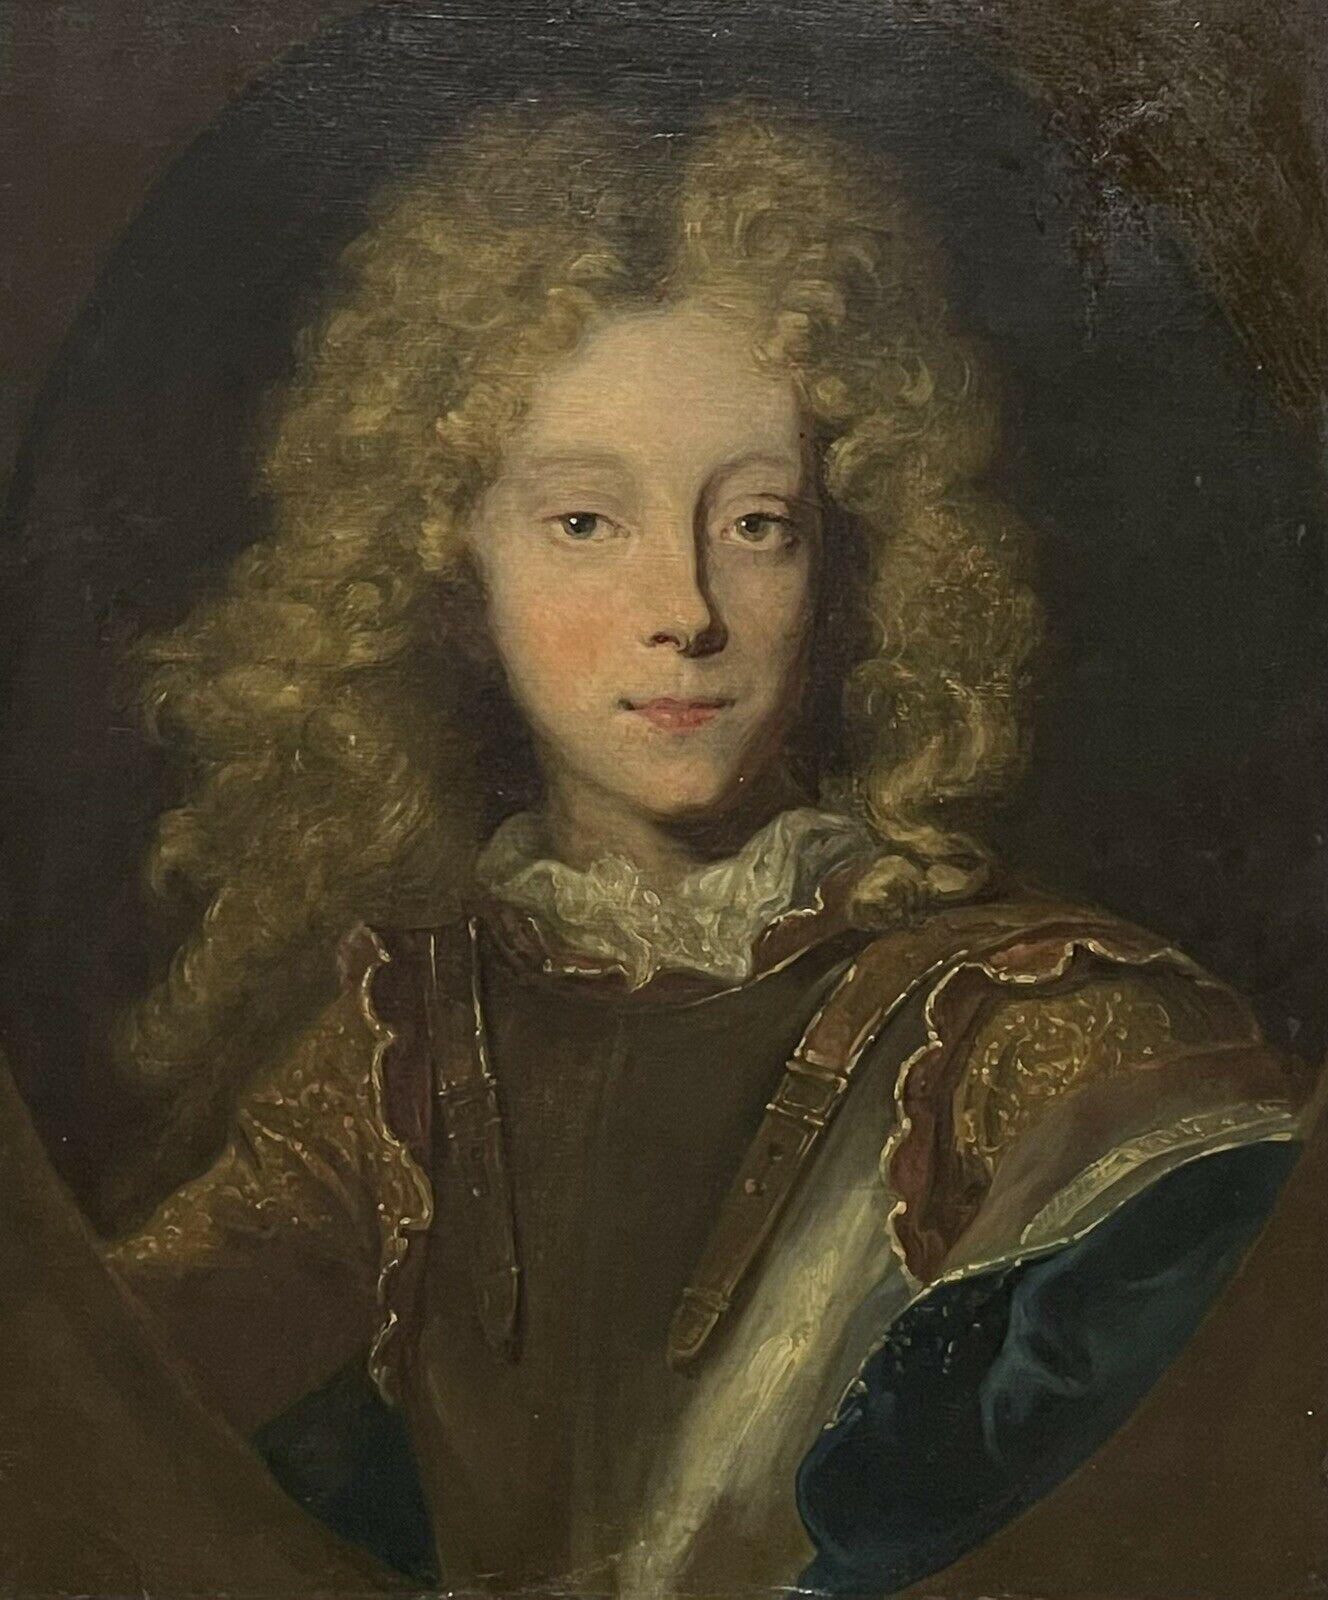 Unknown Figurative Painting - Antique French Oil Portrait of a Young Nobleman/ Prince